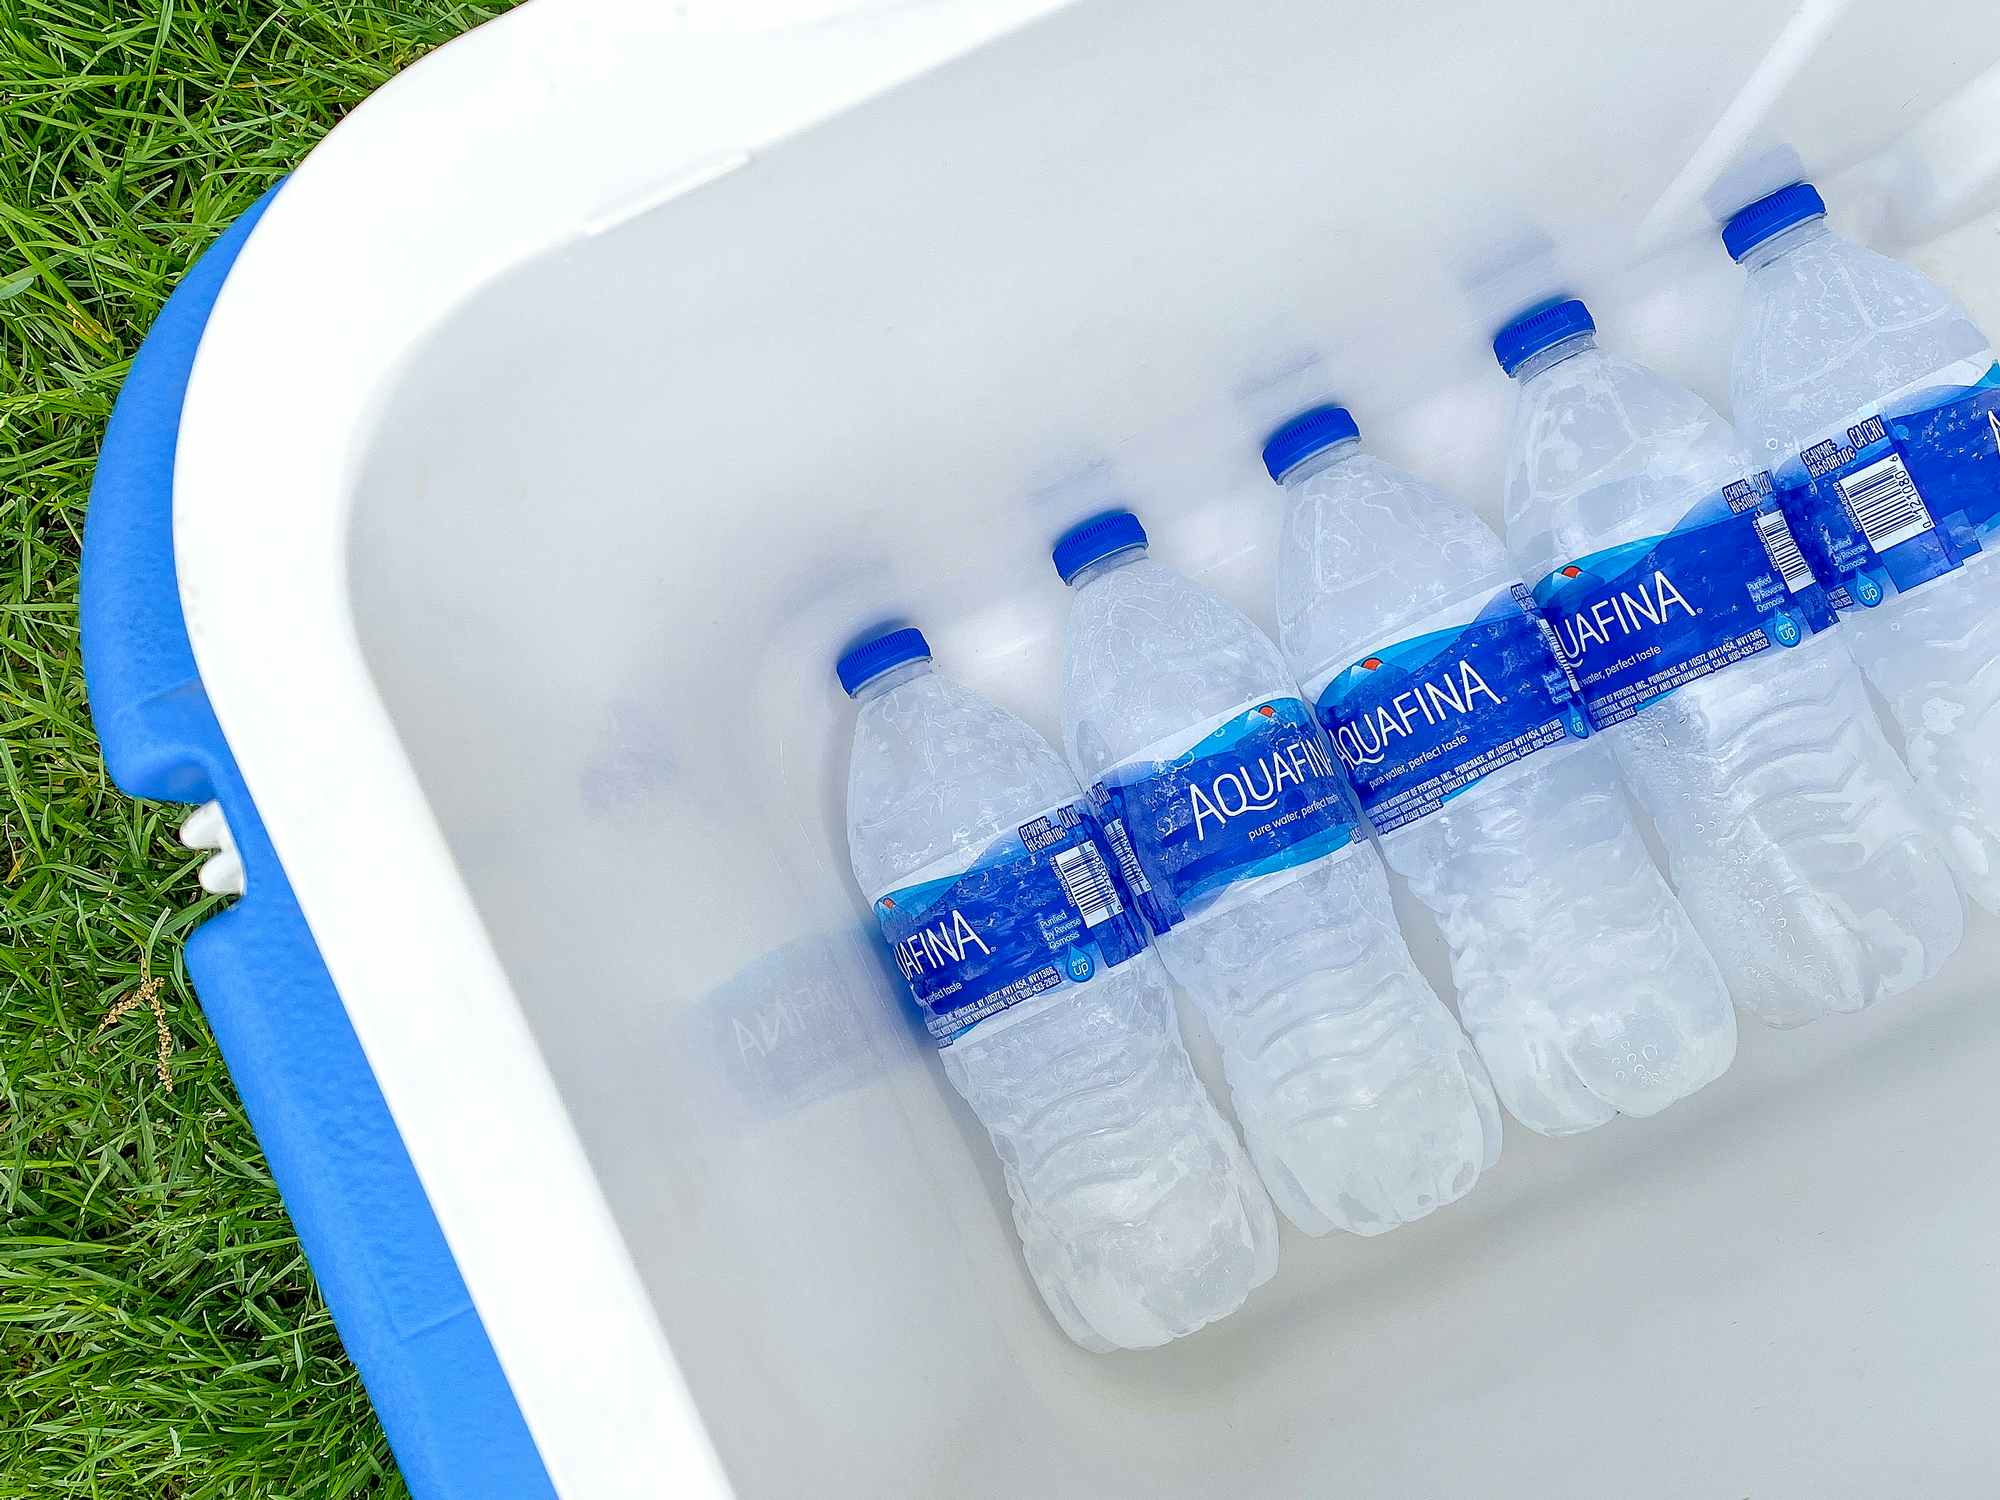 frozen bottles of water serving as ice in a cooler